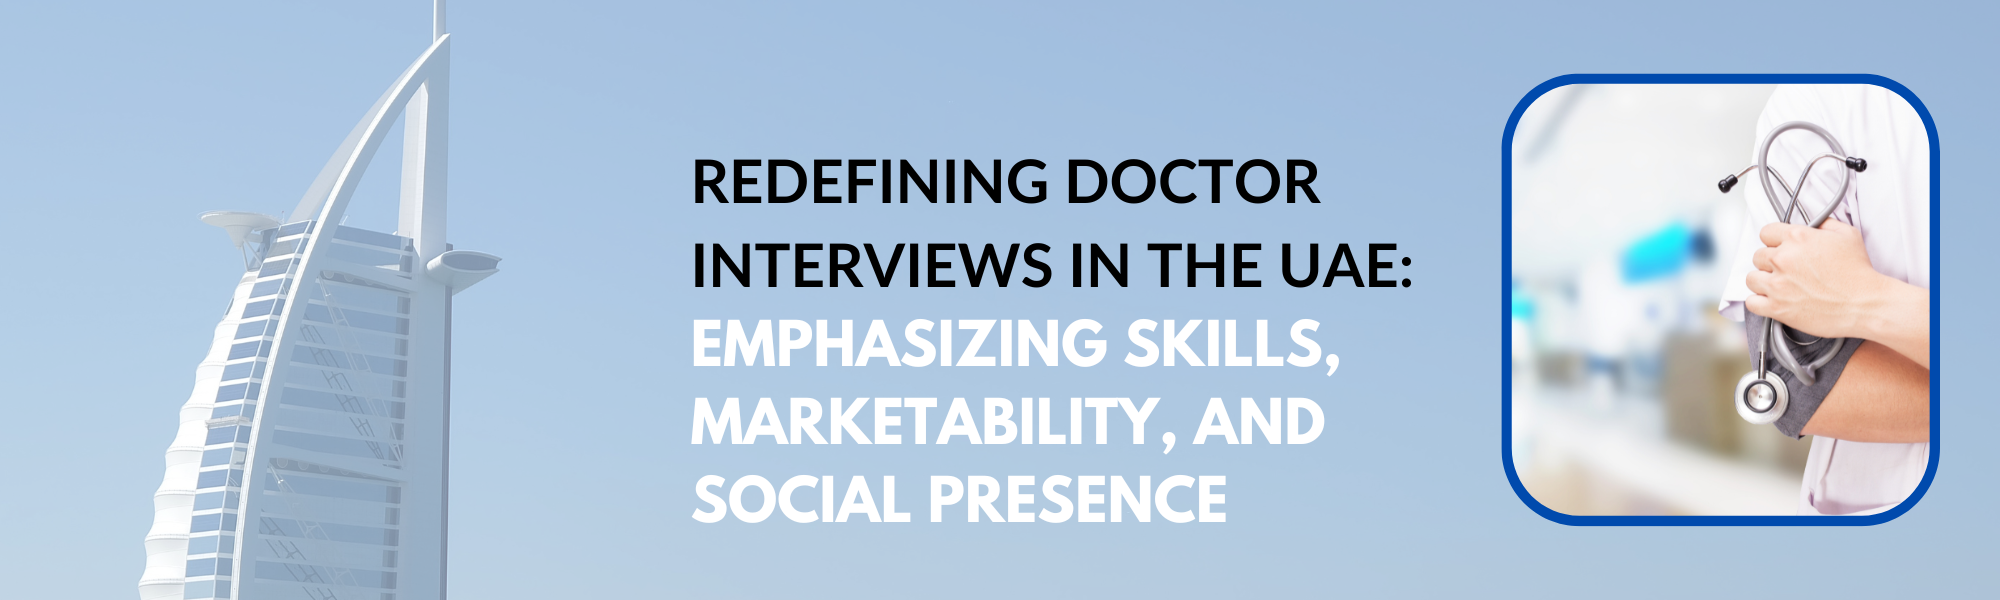 Redefining Doctor Interviews in the UAE: Emphasizing Skills, Marketability, and Social Presence